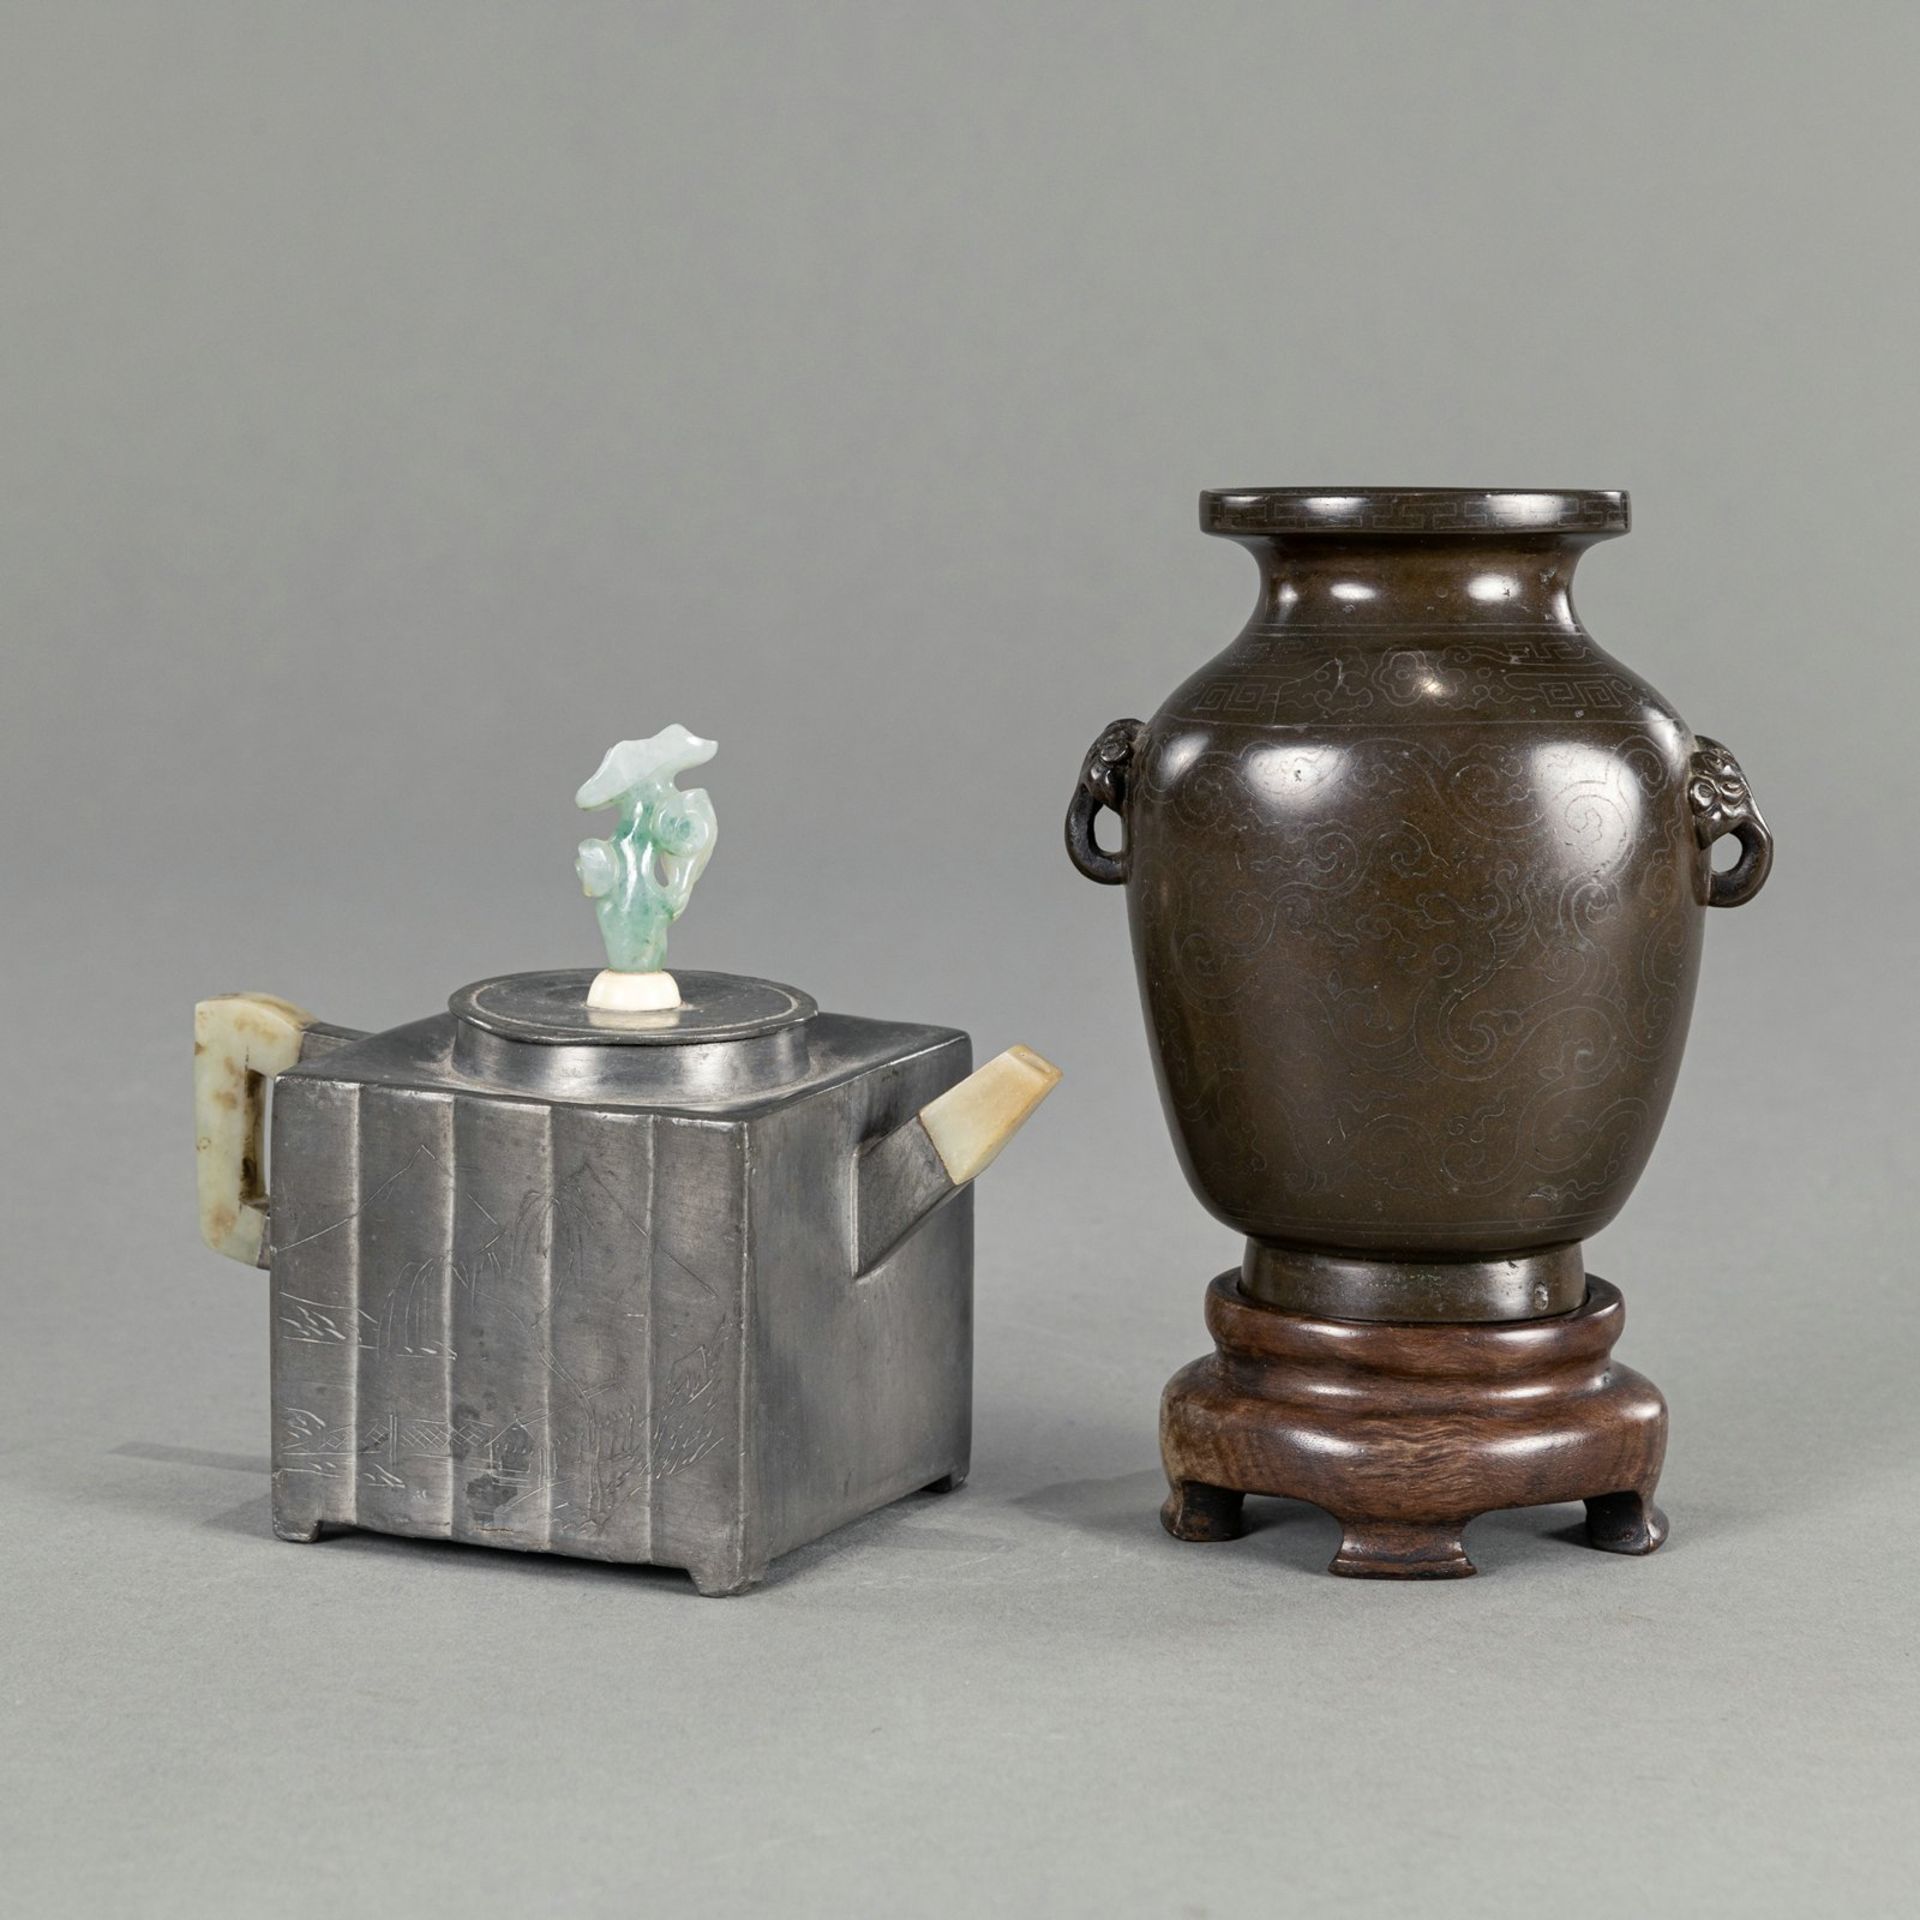 AN INSCRIBED ZISHA AND TIN TEAPOT AND COVER WITH IVORY AND JADEITE HANDLE AND A BRONZE VASE